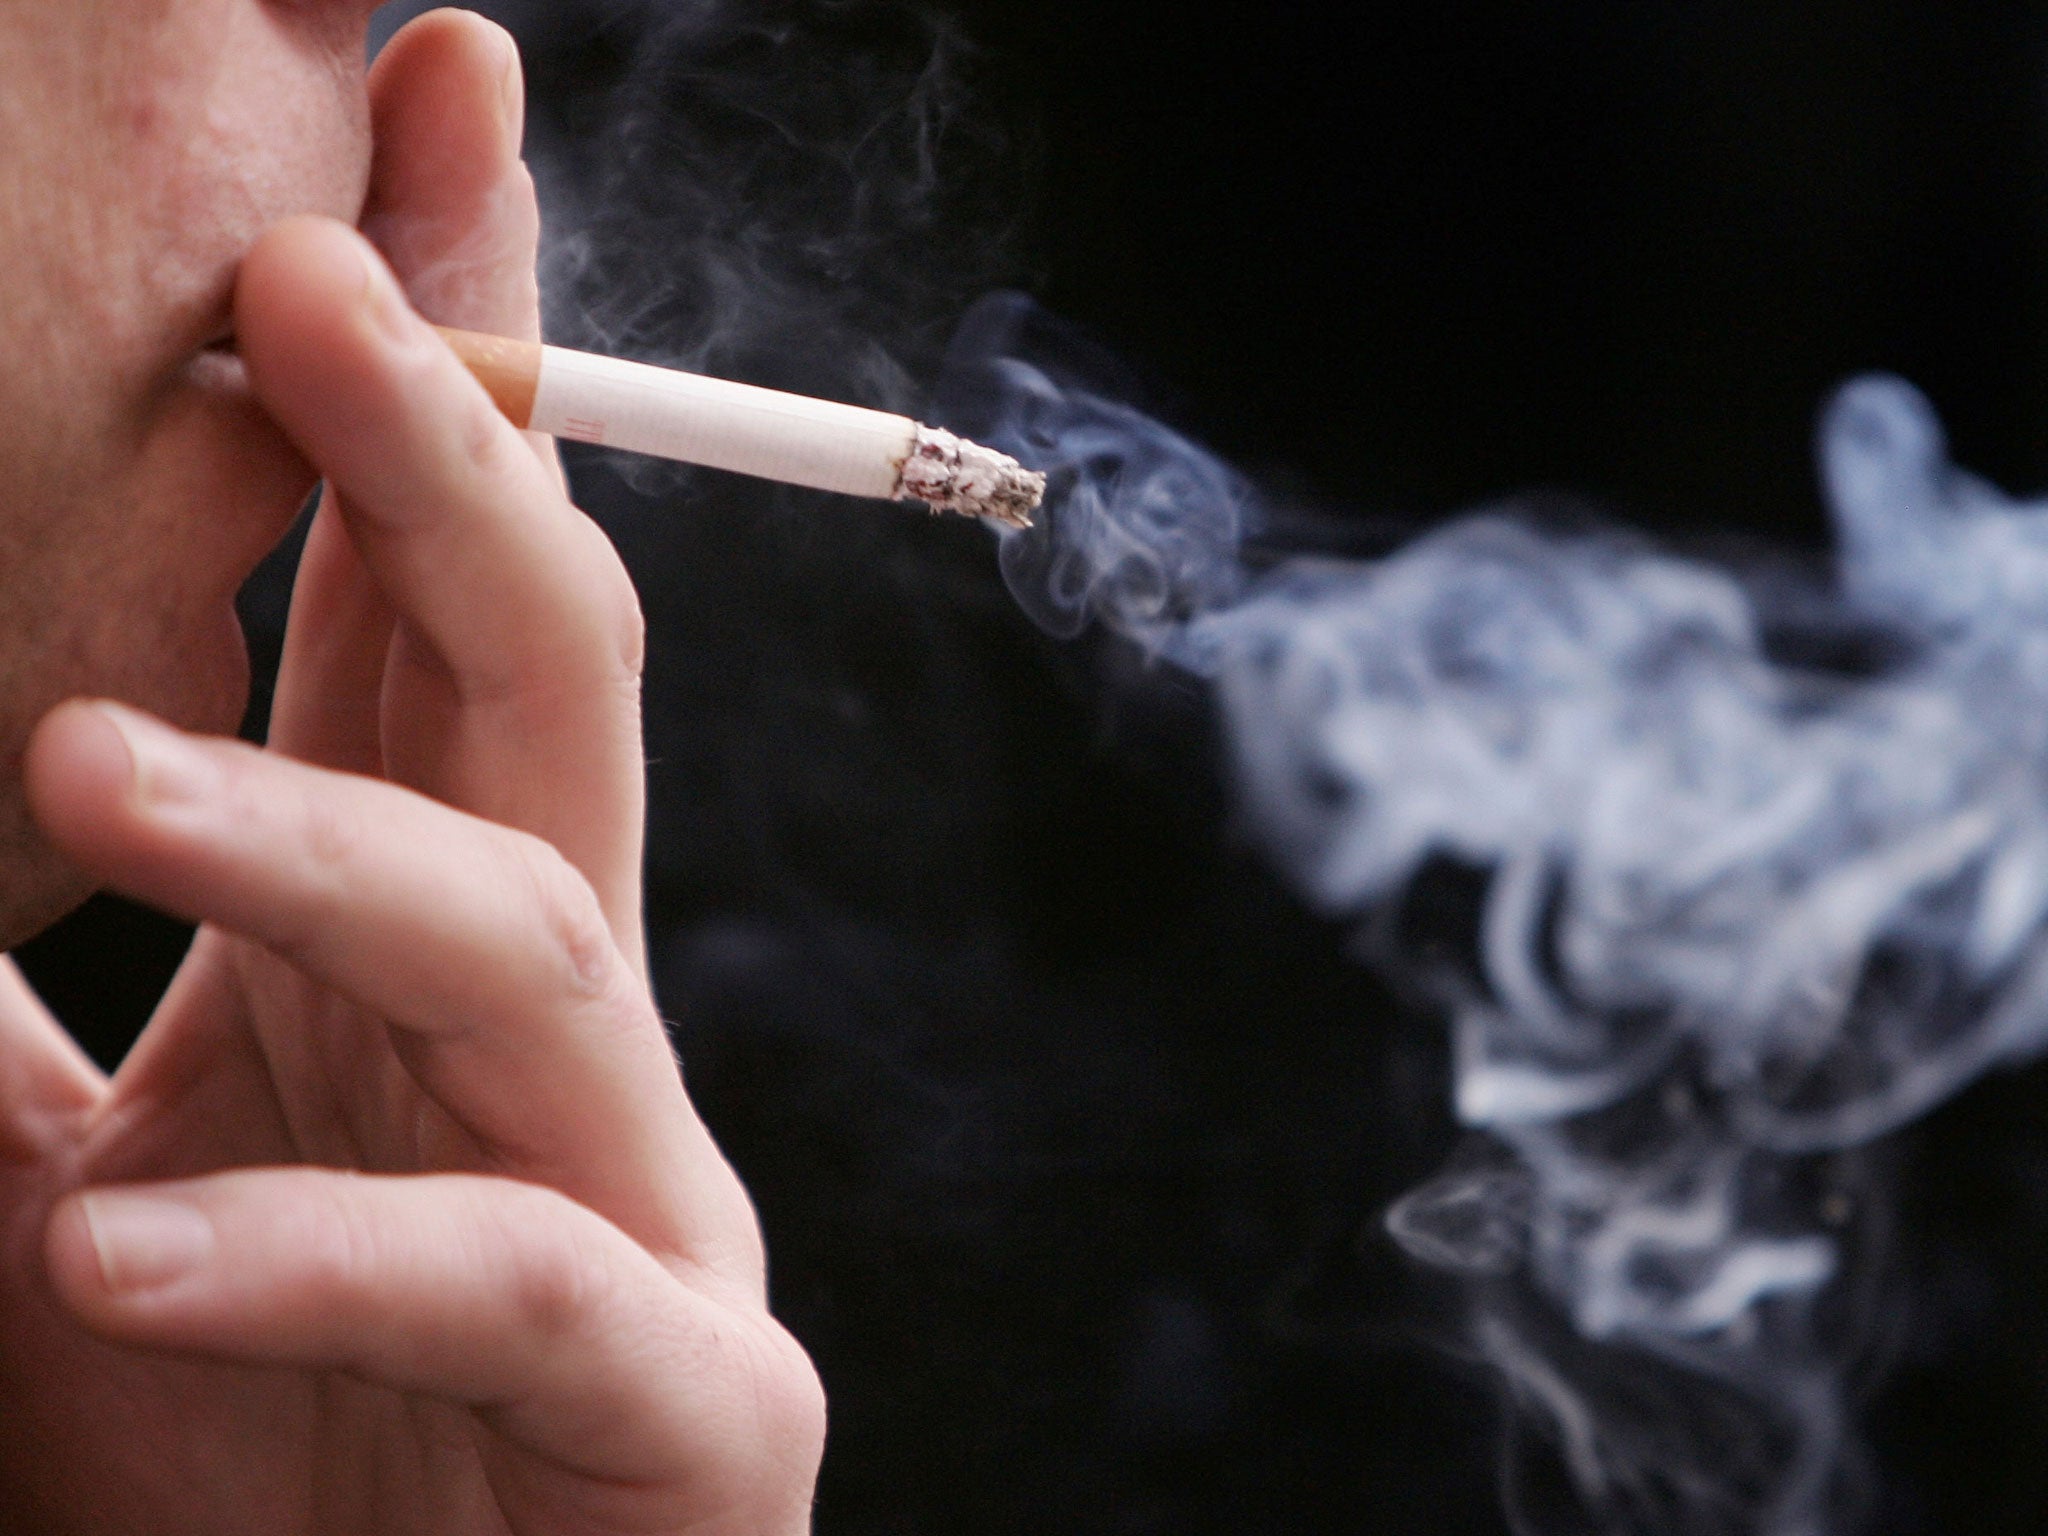 Ministers set to act over smoking